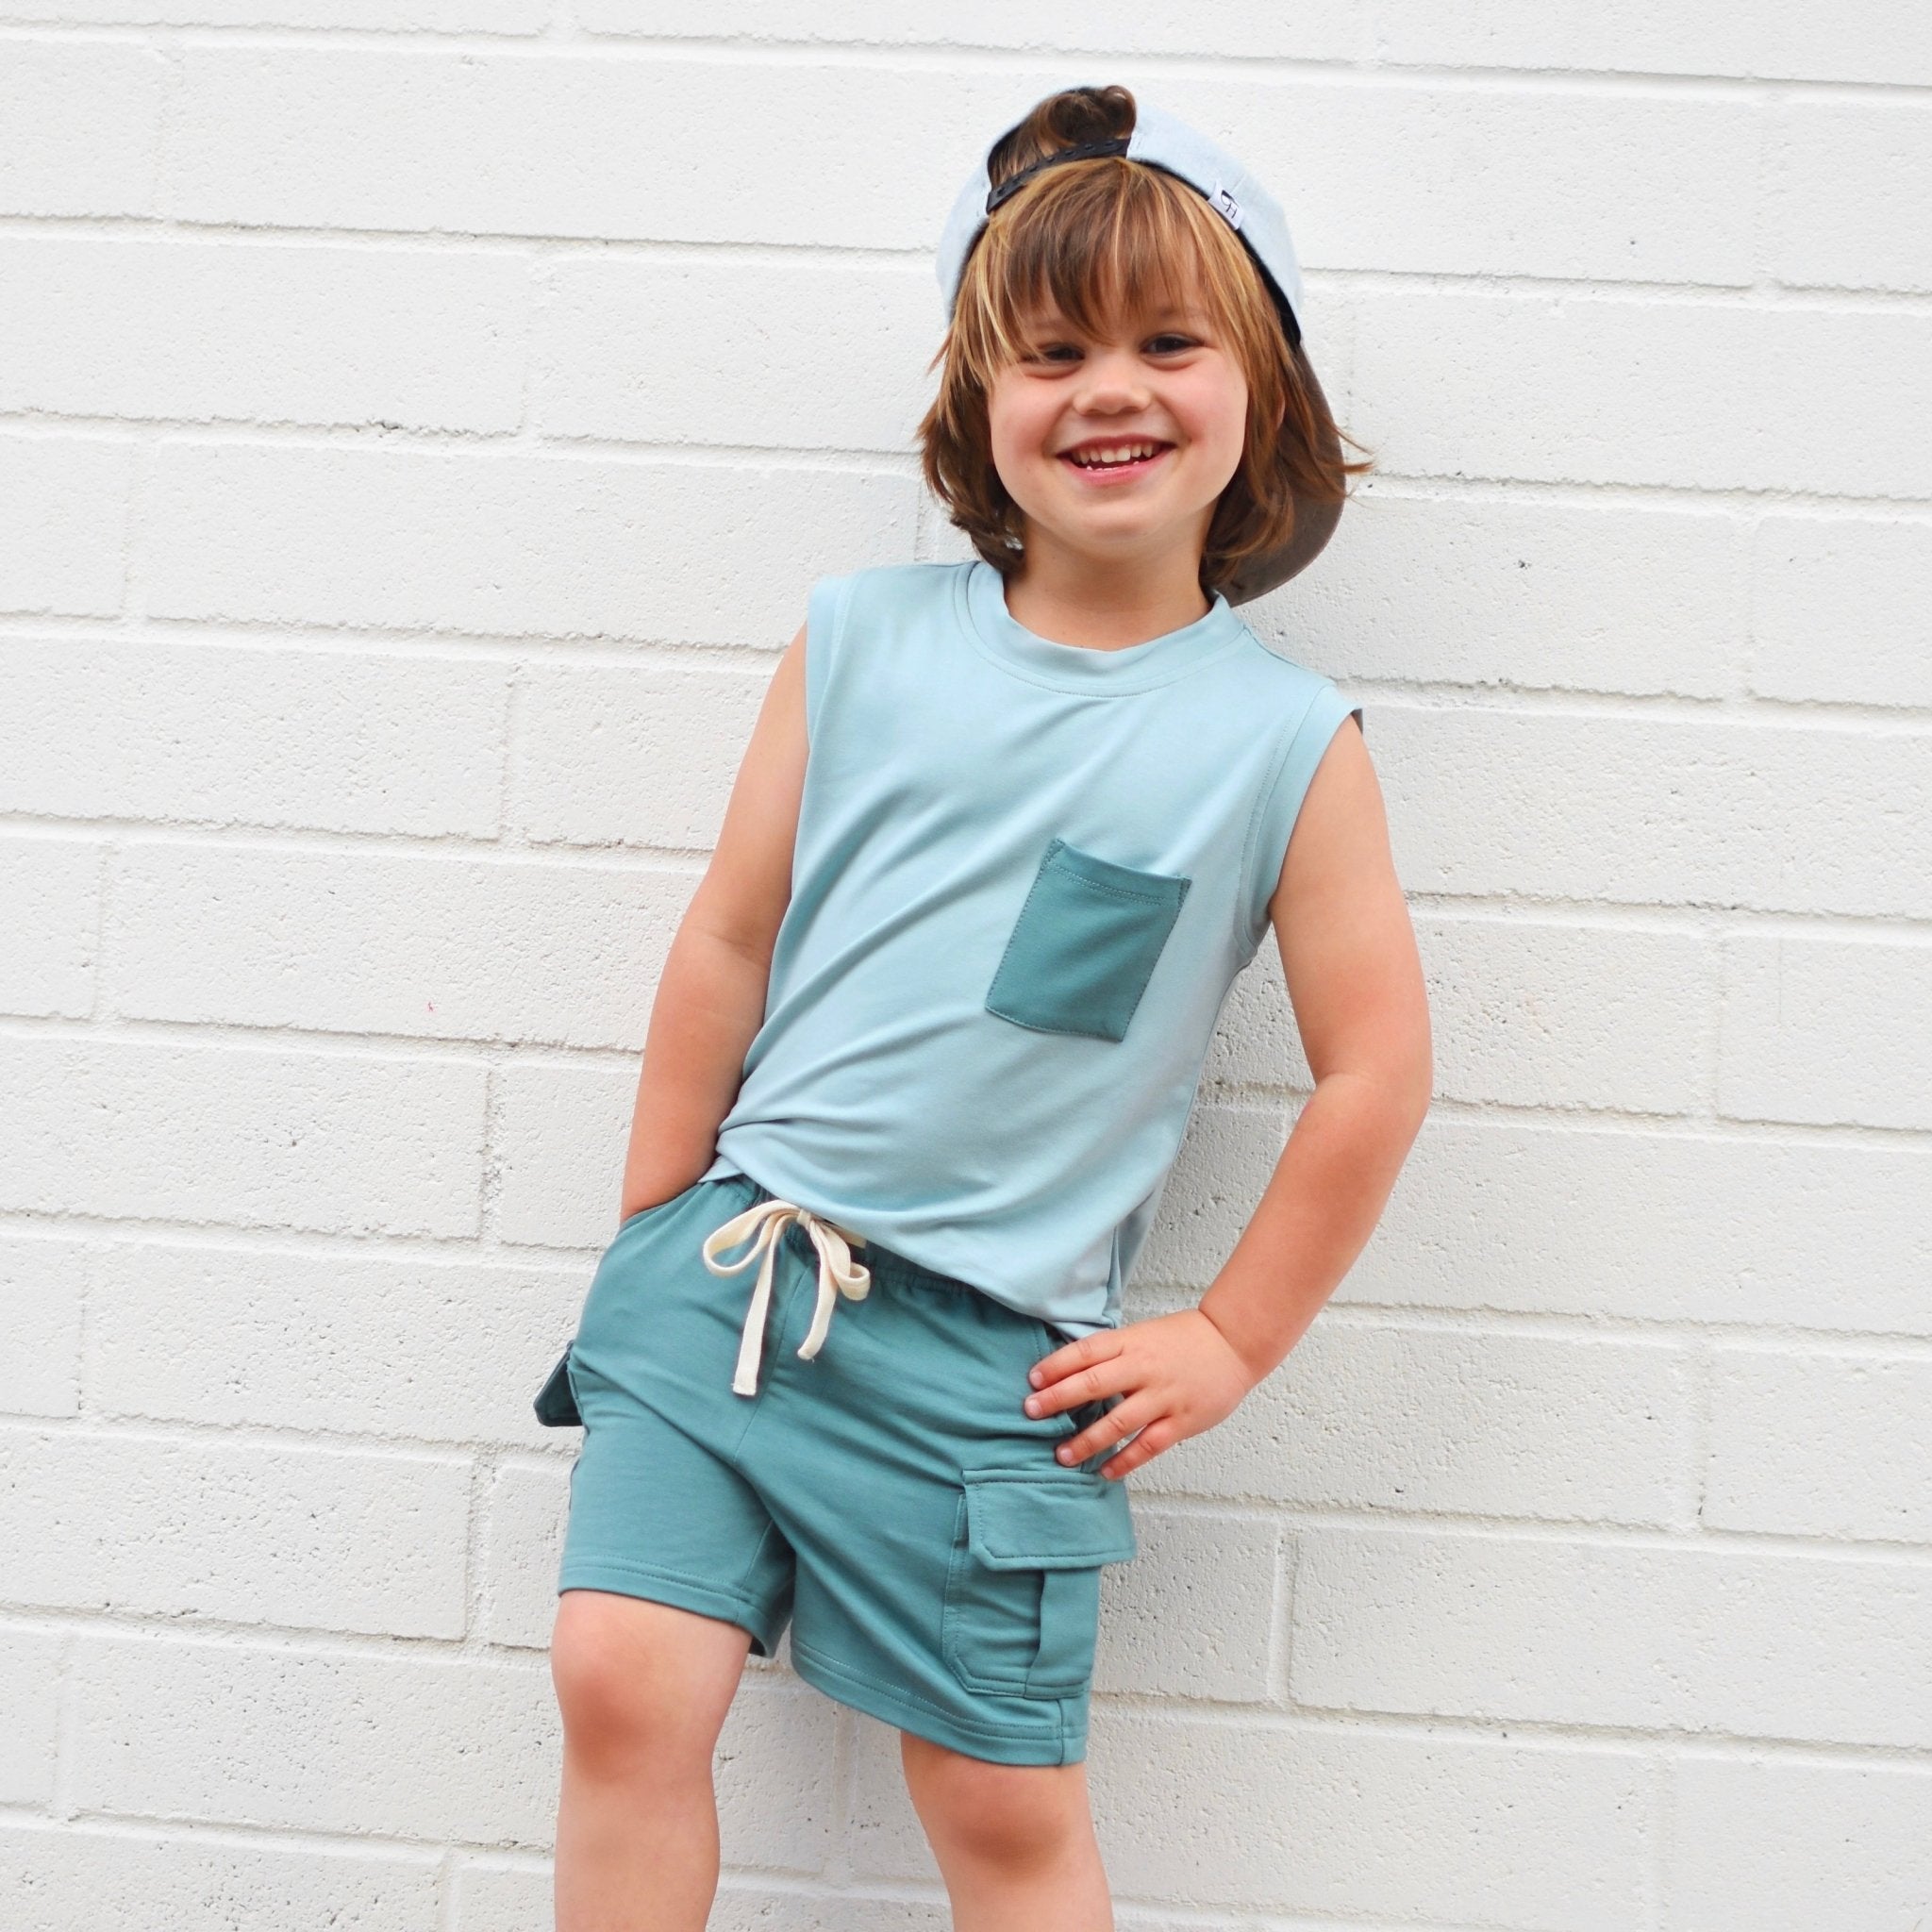 Teal Bamboo Cargo Shorts - George Hats